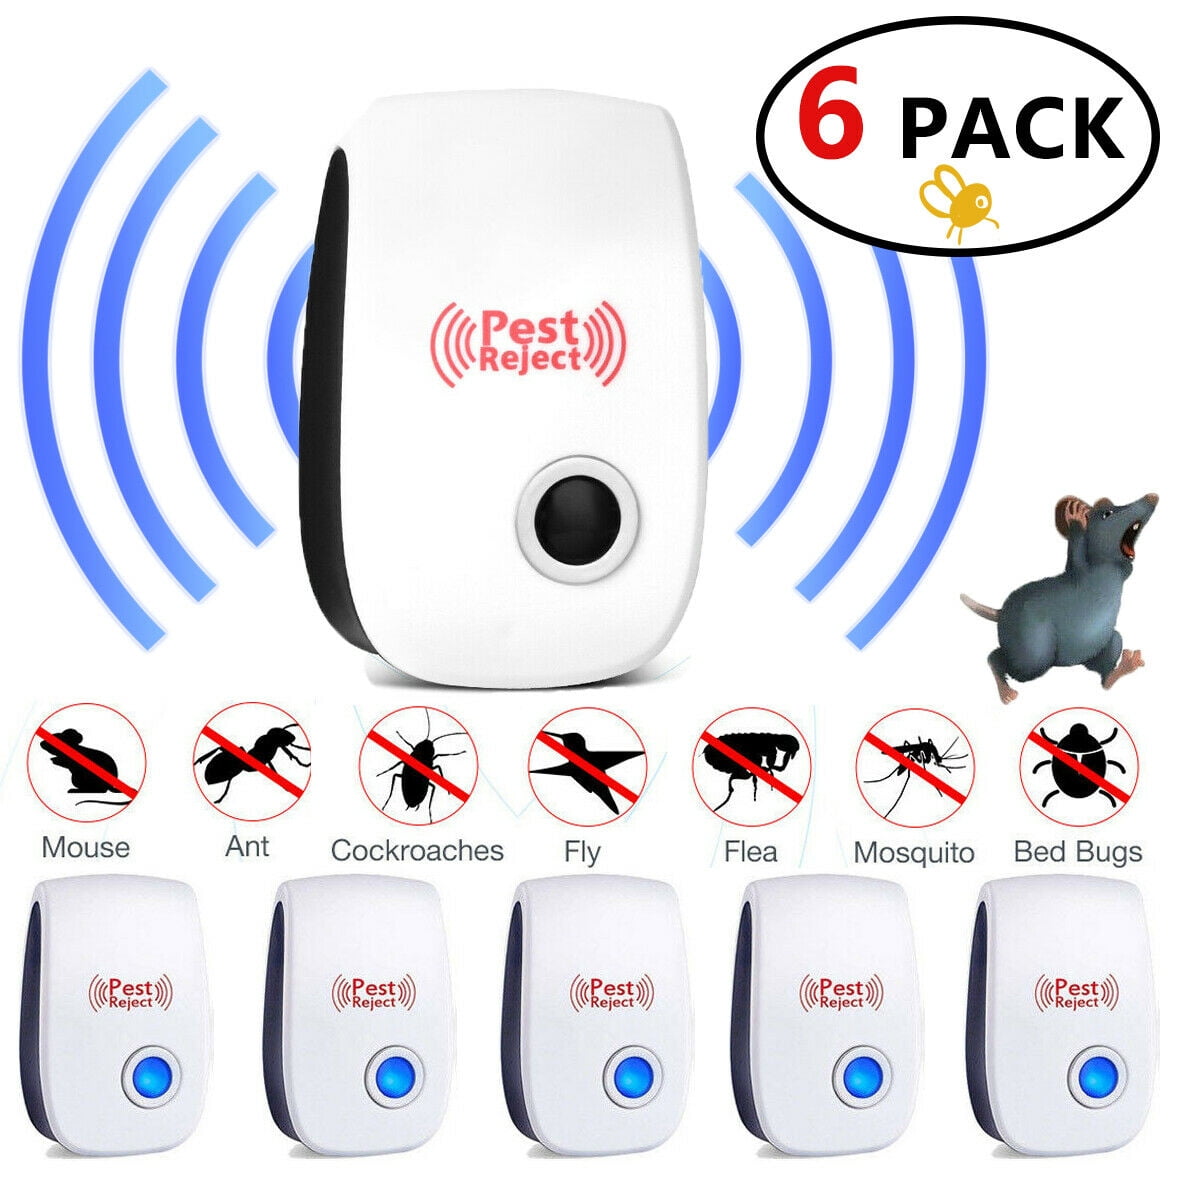 Ultrasonic Pest Reject Electronic Repeller Mosquito Bug Mice Insect Killer qw 